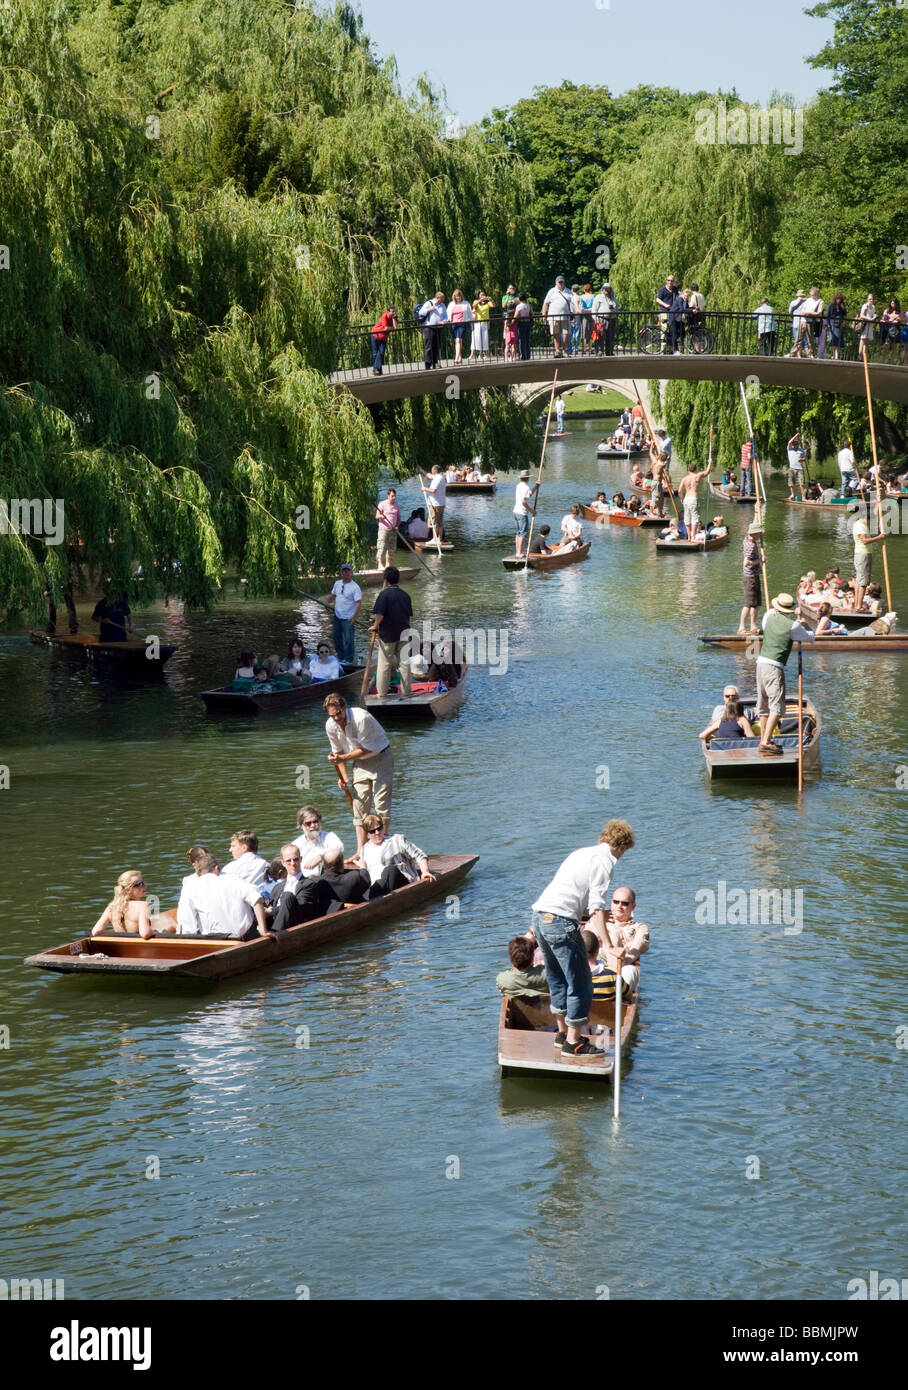 Punting on the River Cam, Cambridge, UK on a sunny summers day Stock Photo  - Alamy